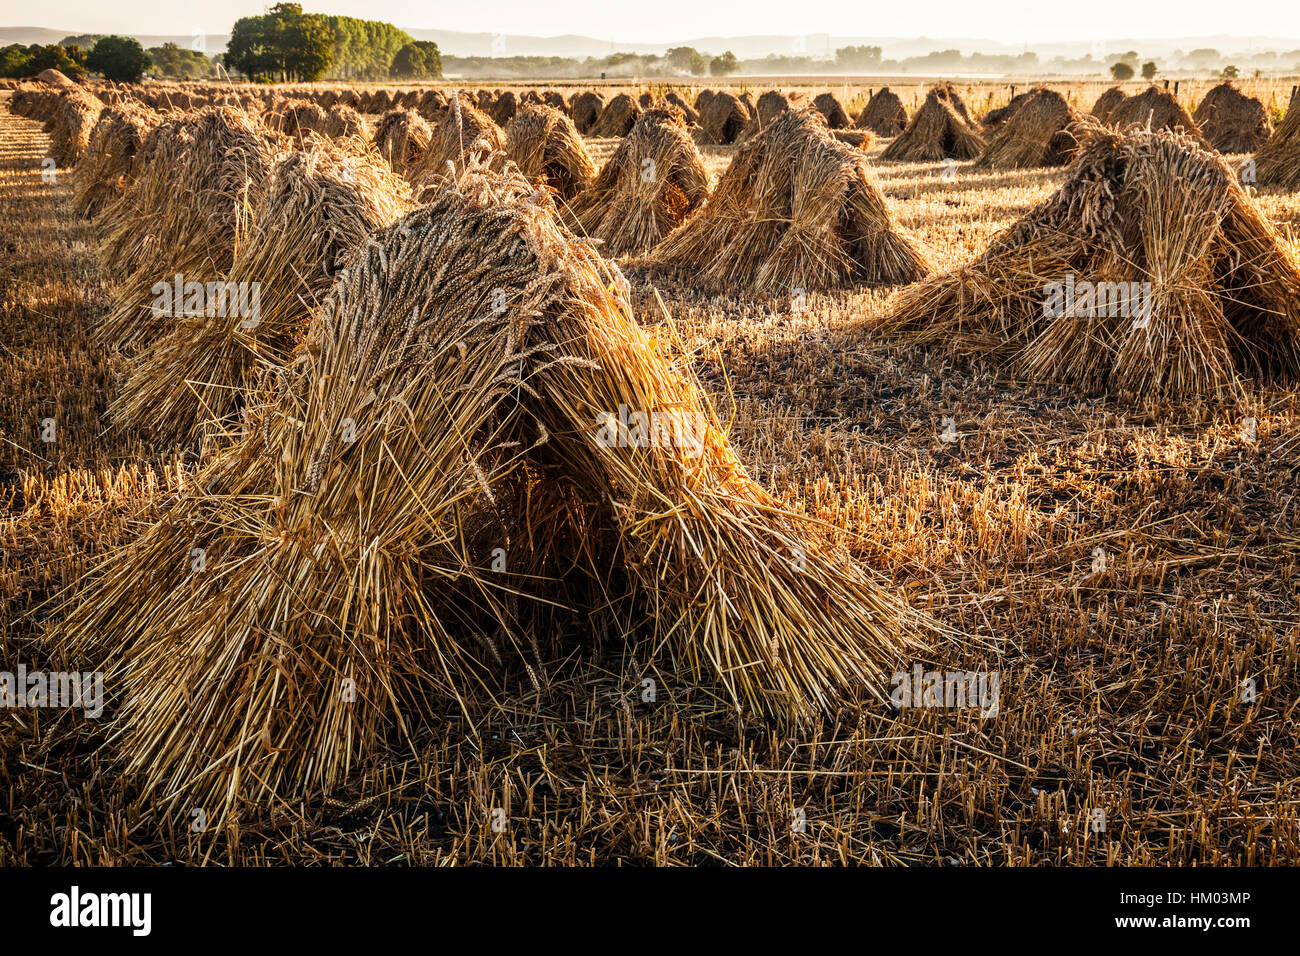 Traditional stooks of wheat in a field in Wiltshire, UK. Stock Photo